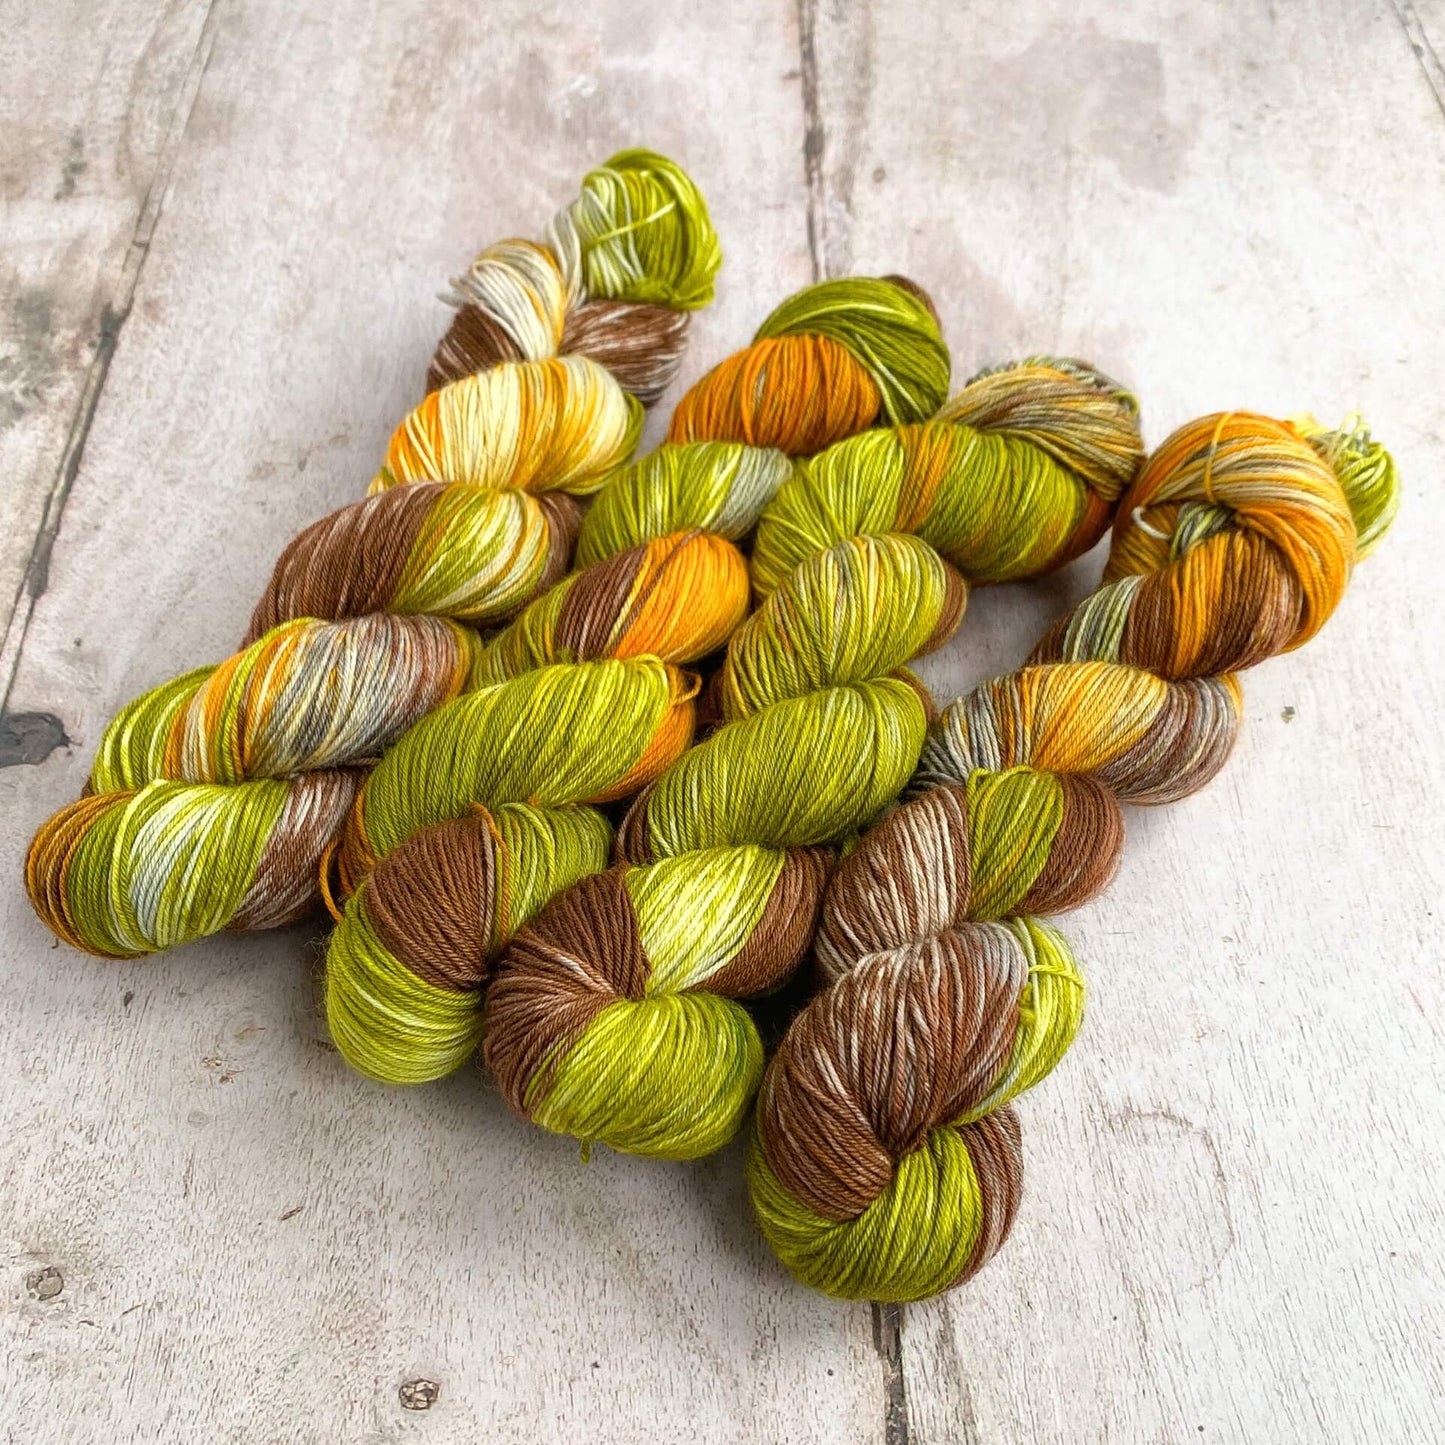 Four skeins of hand dyed yarn lie on a wooden table. The colours in the skeins are browns, greens and oranges and are reminiscent of the colours of autumn.